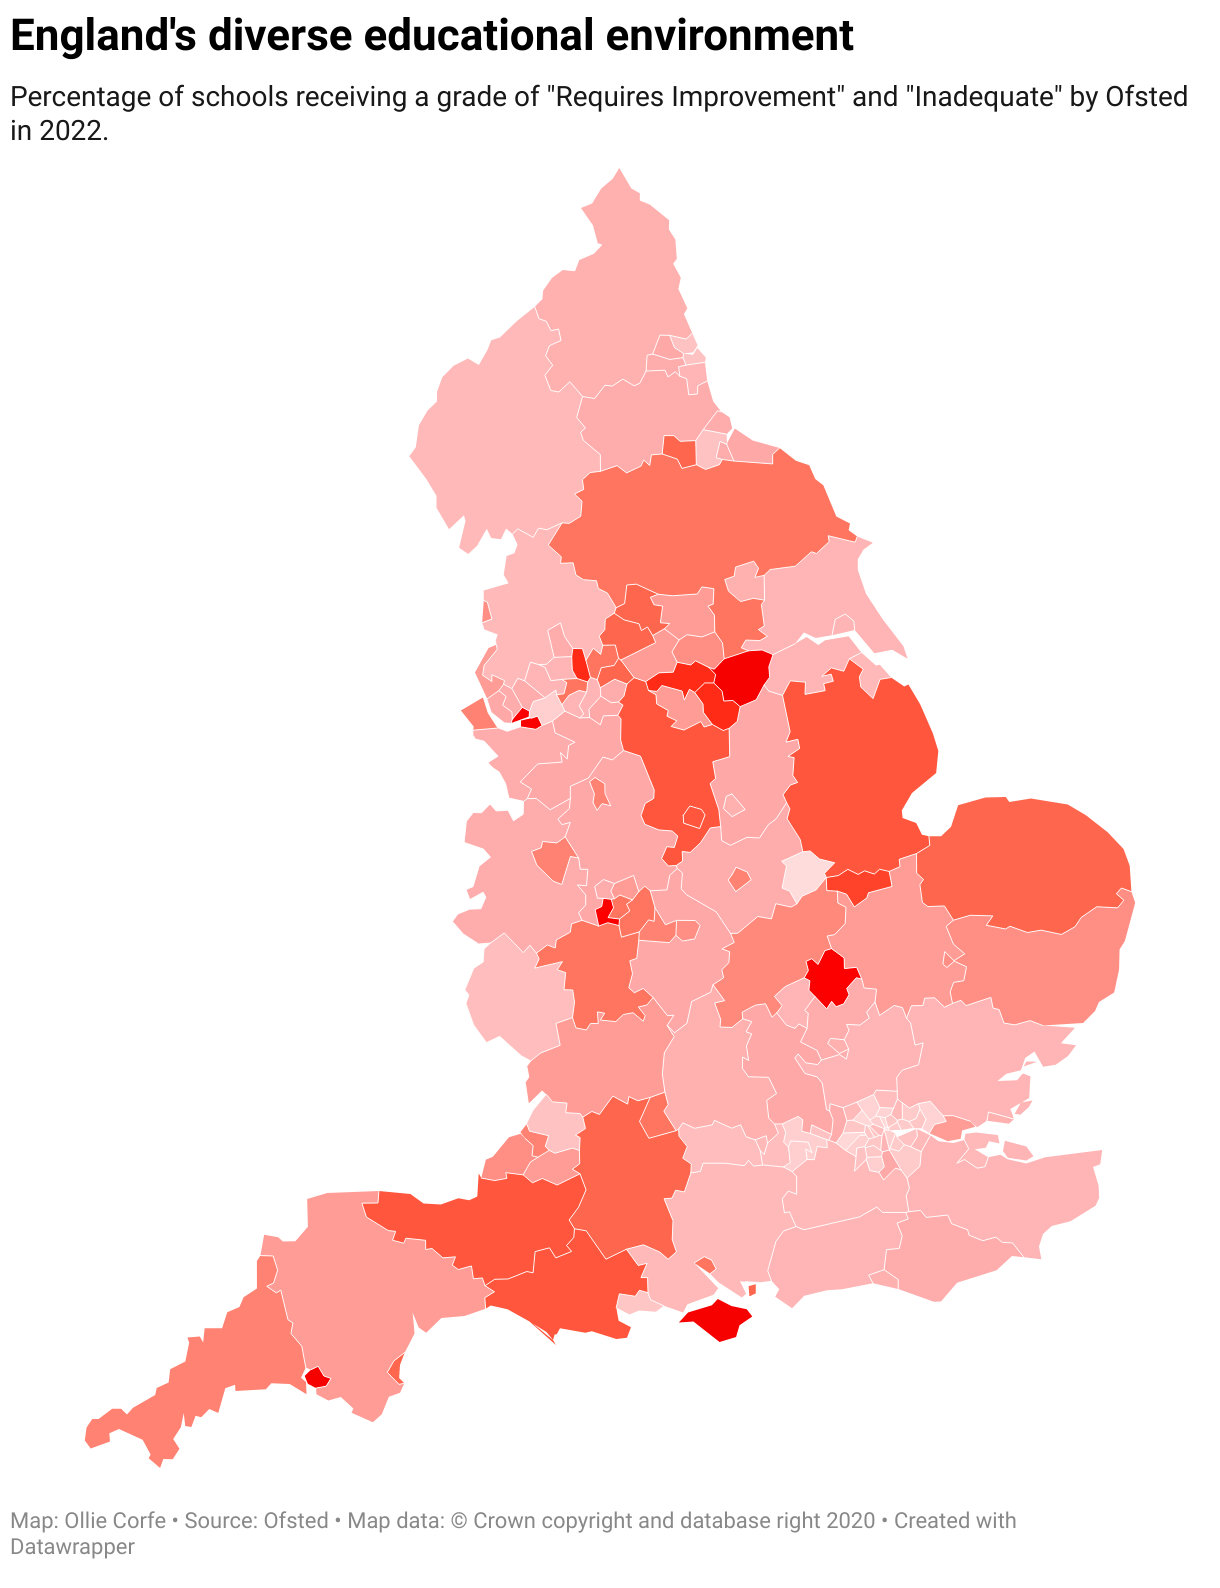 Map of the UK coloured by Ofsted grades.